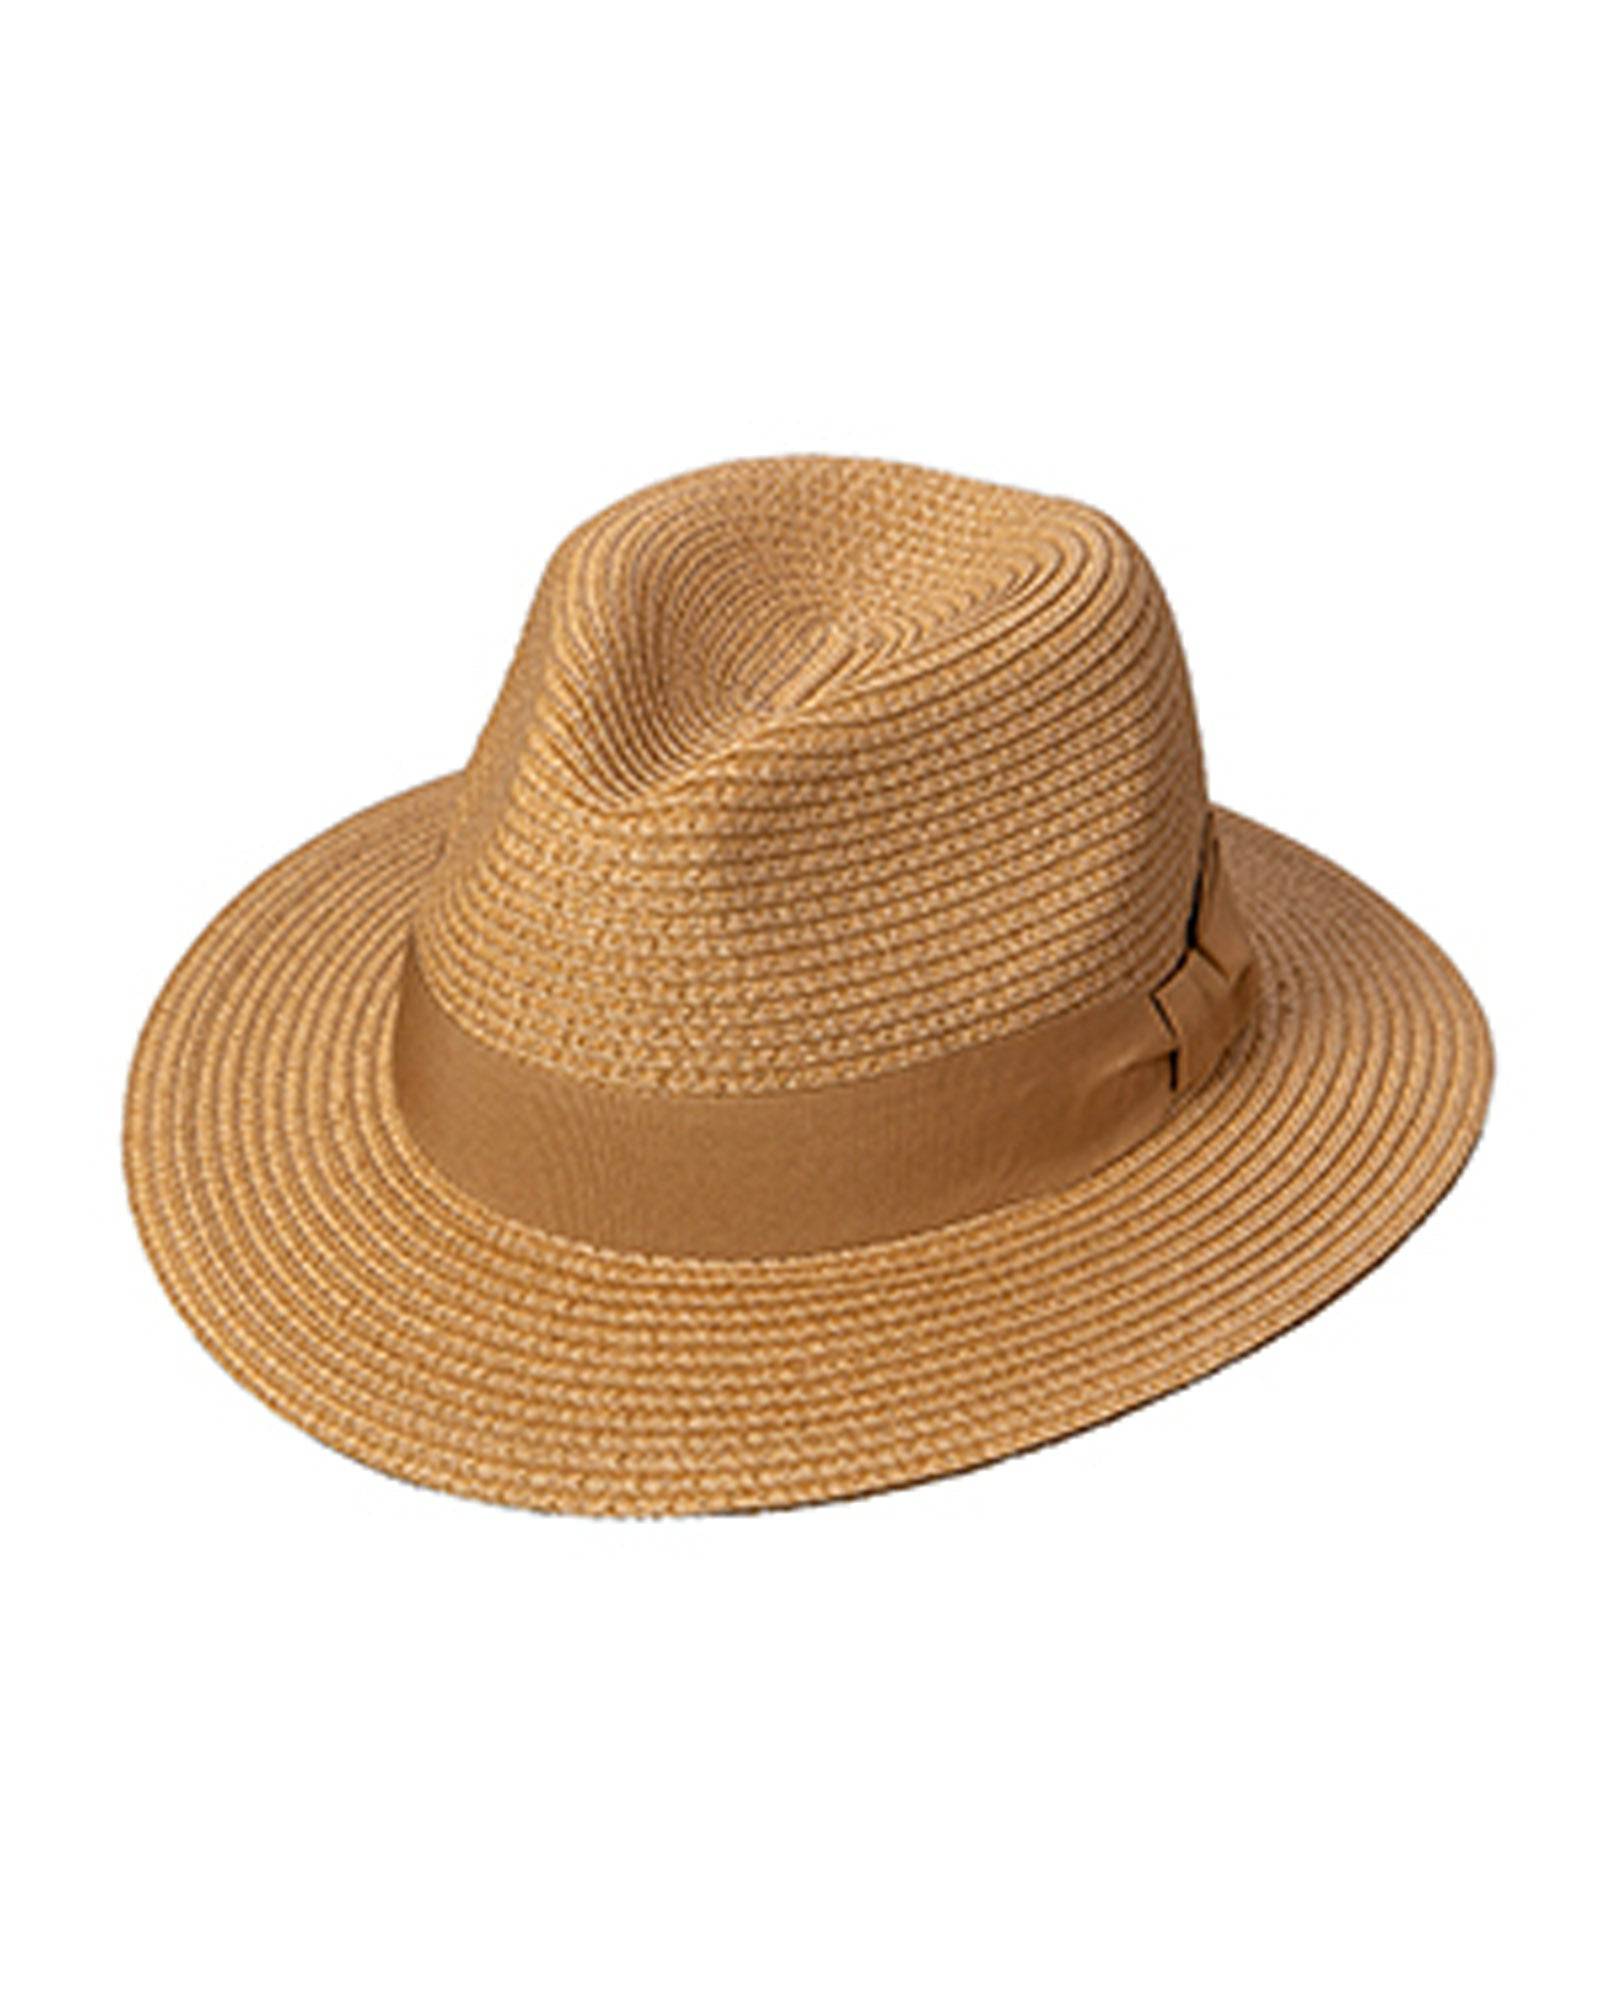 Broner Suitable Marled Wheat Straw Fedora with 2.5 inch brim - Rainwater's Men's Clothing and Tuxedo Rental